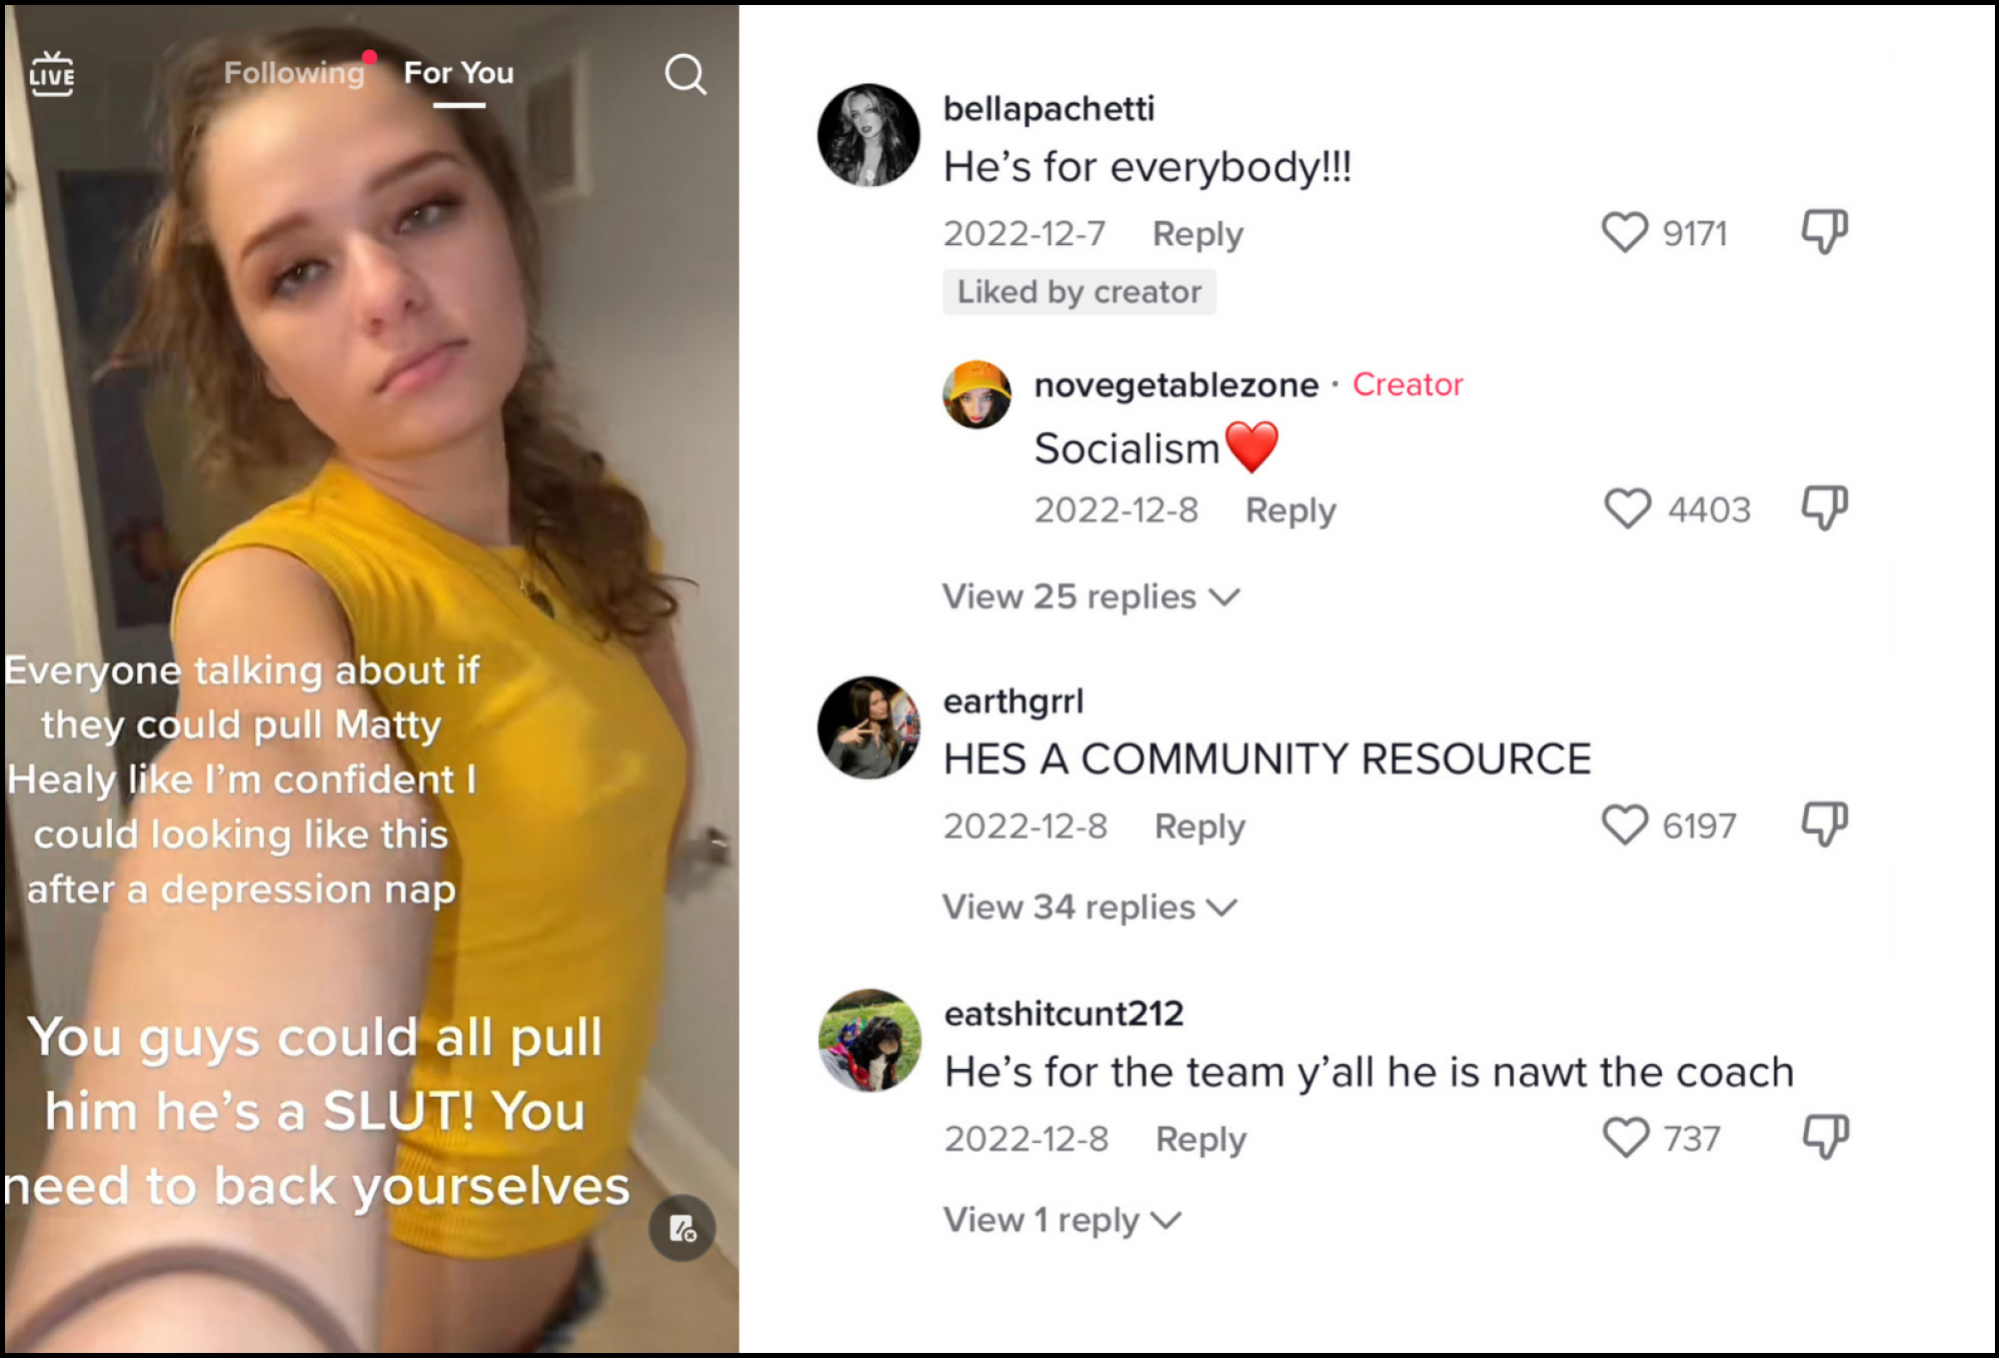 Screenshot of a TikTok of a girl in messy eyeliner and a yellow t-shirt with the text "Everyone talking about if they could pull Matty Healy like I'm confident I could looking like this after a depression nap. You guys could all pull him he's a SLUT! You need to back yourselves." Next to that screenshot is a screenshot of comments under the video that read: "He's for everybody!!" "He's a community resource!" and "He's for the team y'all he is nawt the coach"